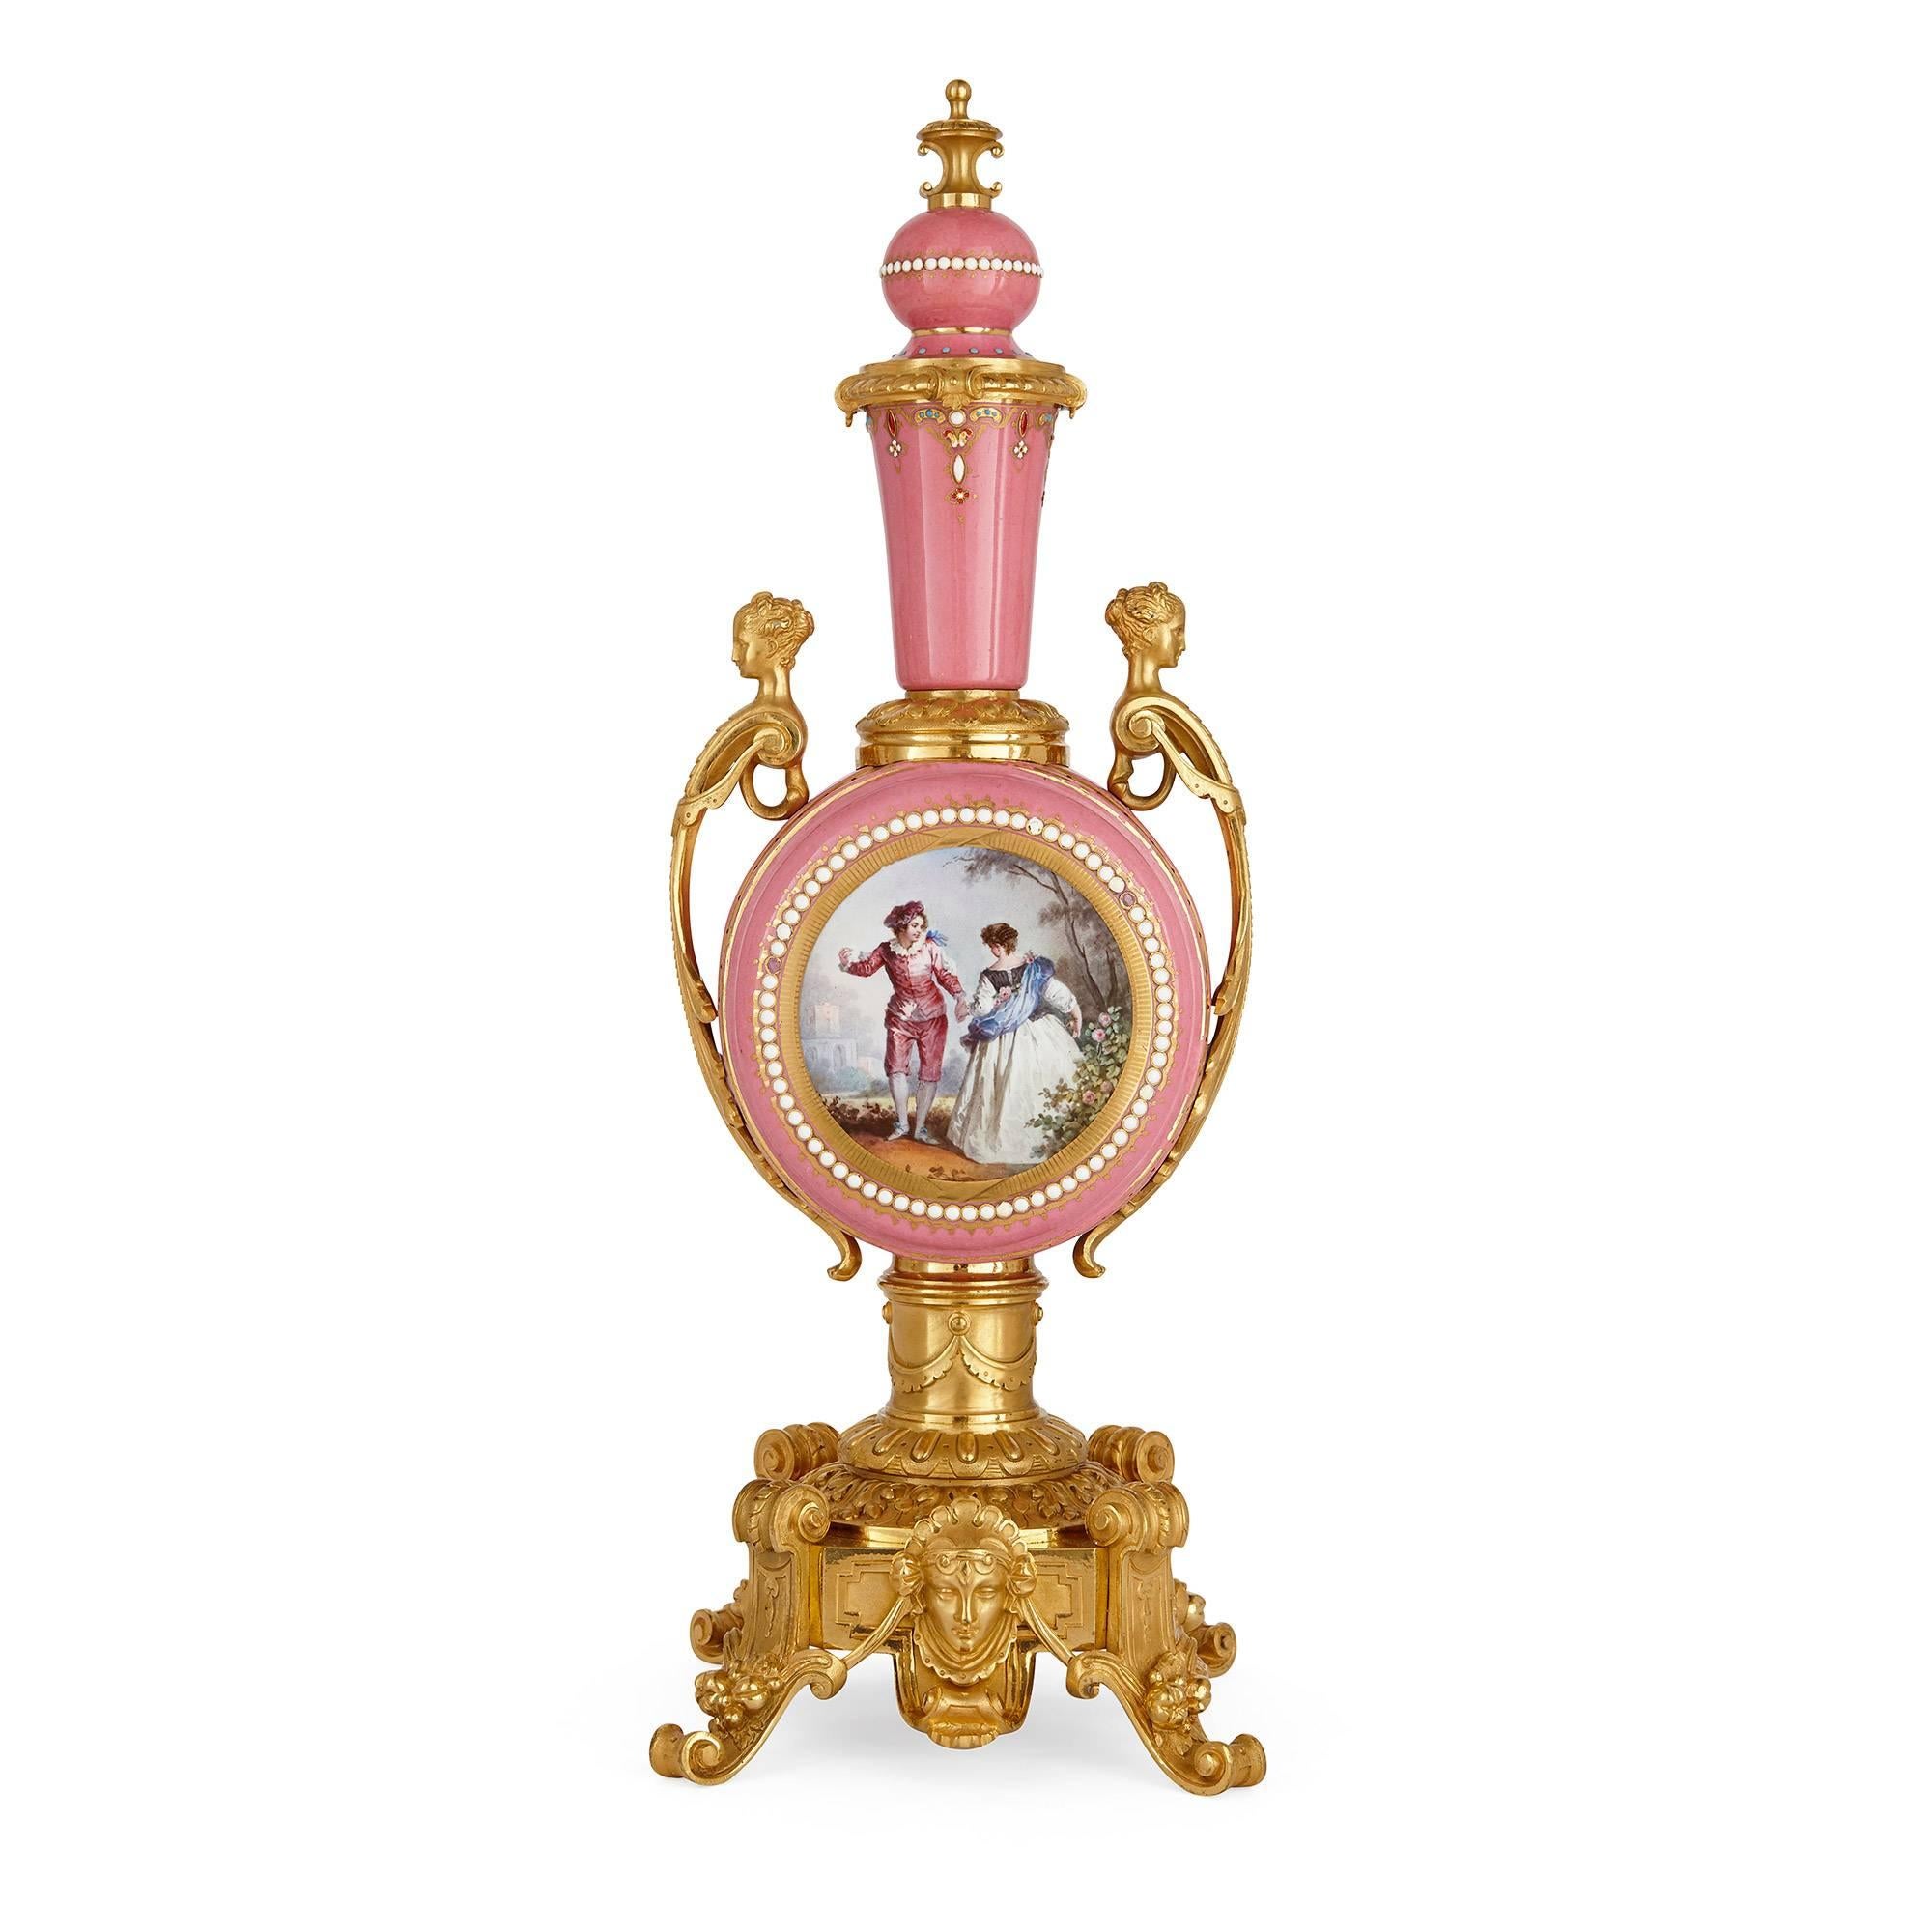 19th Century Sèvres Style Gold Ormolu and Pink Porcelain Antique French Three-Piece Clock Set For Sale